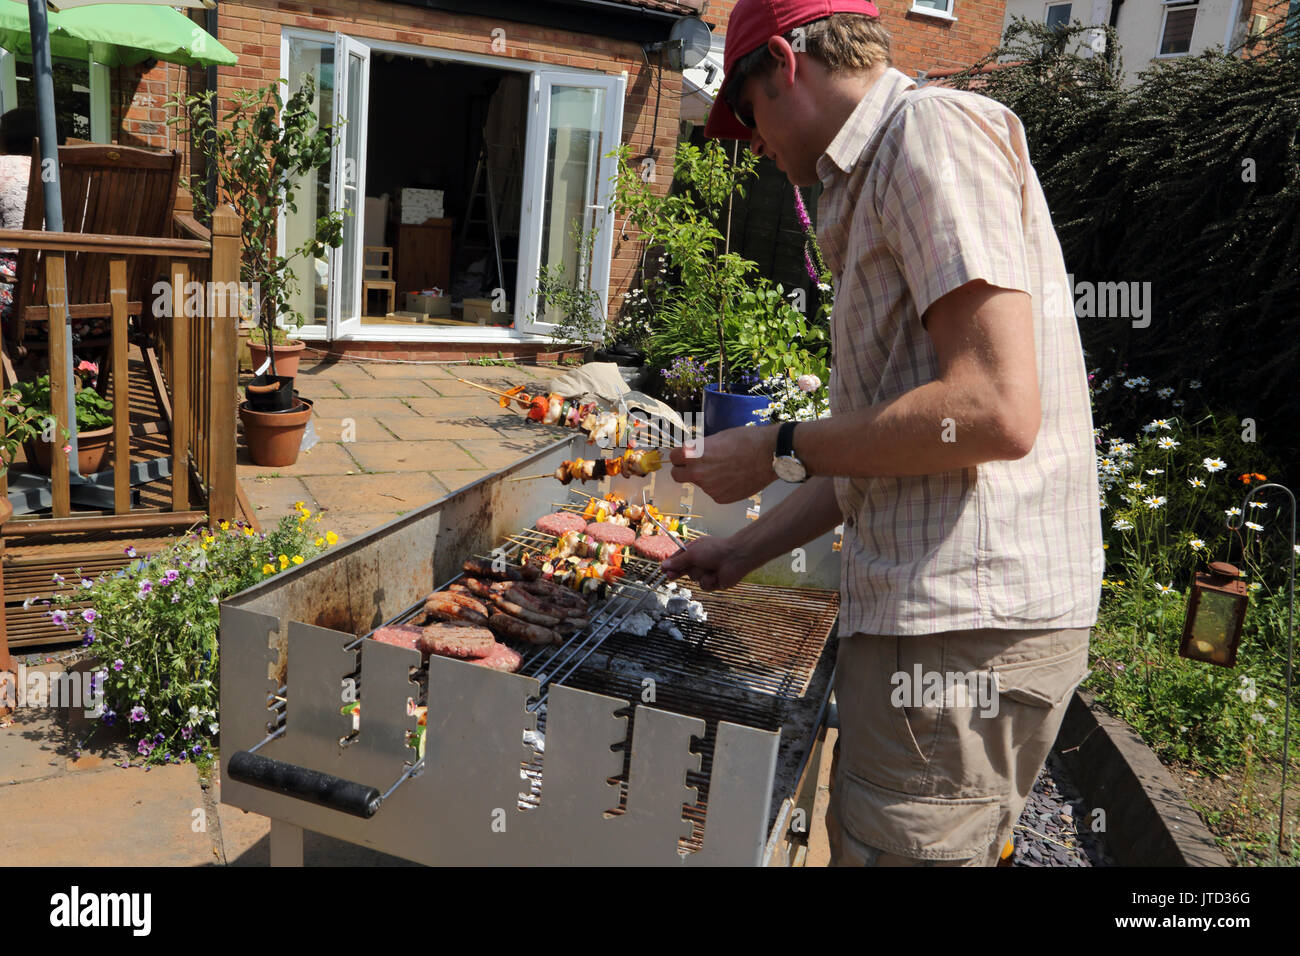 Man Cooking At A Barbeque In Garden During The Summer Birmingham West Midlands England Stock Photo